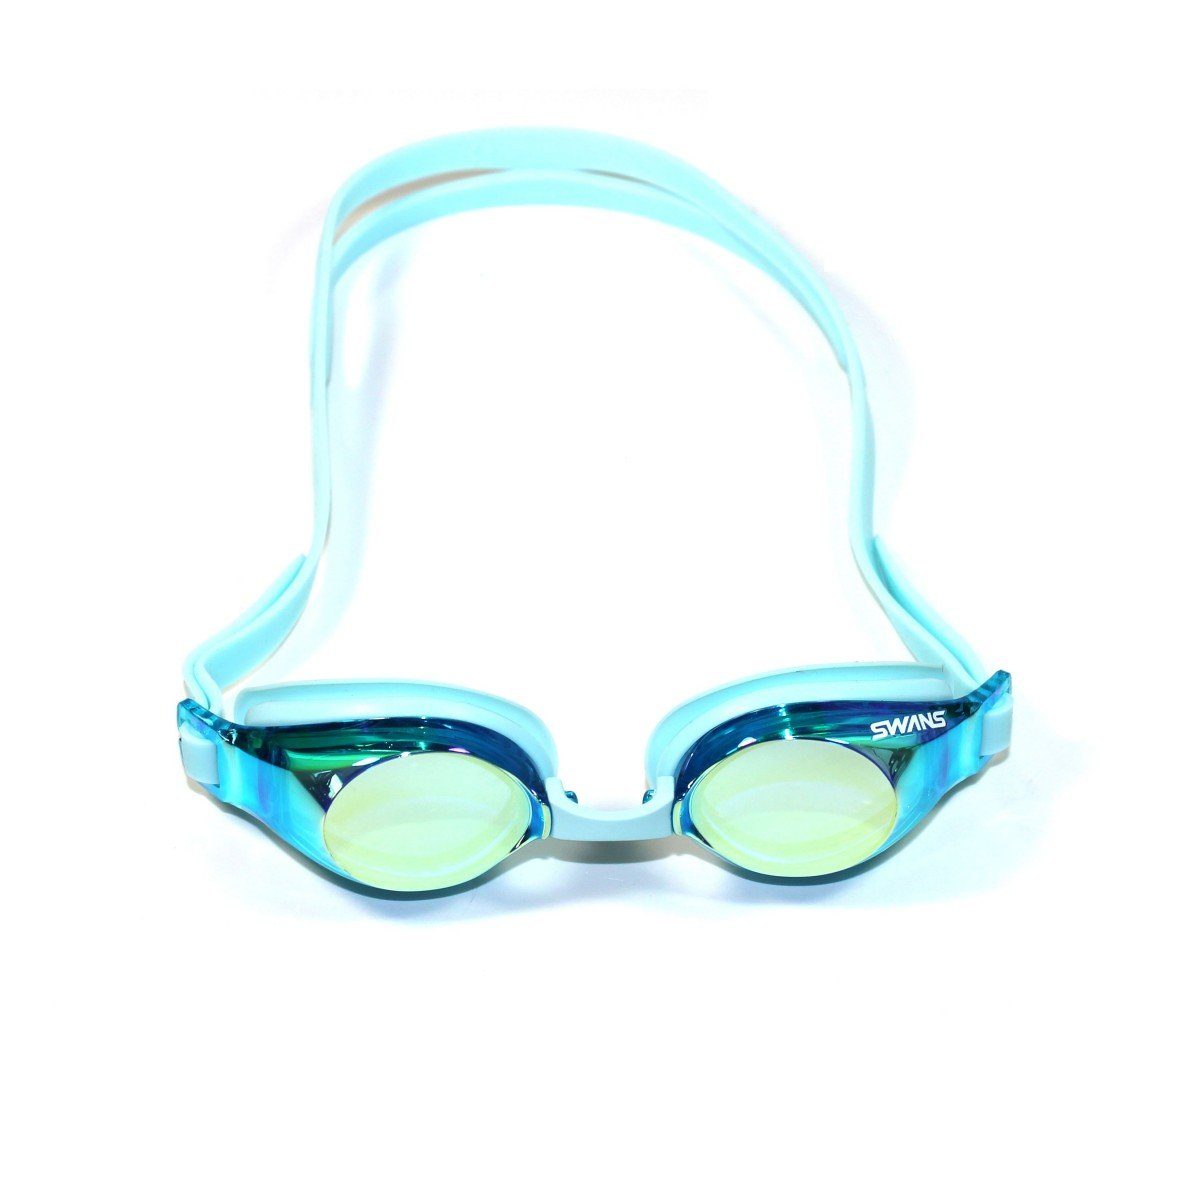 SWANS Schwimmbrille SJ-22M Kinderschwimmbrille skyblue and flash yellow (SBFY)